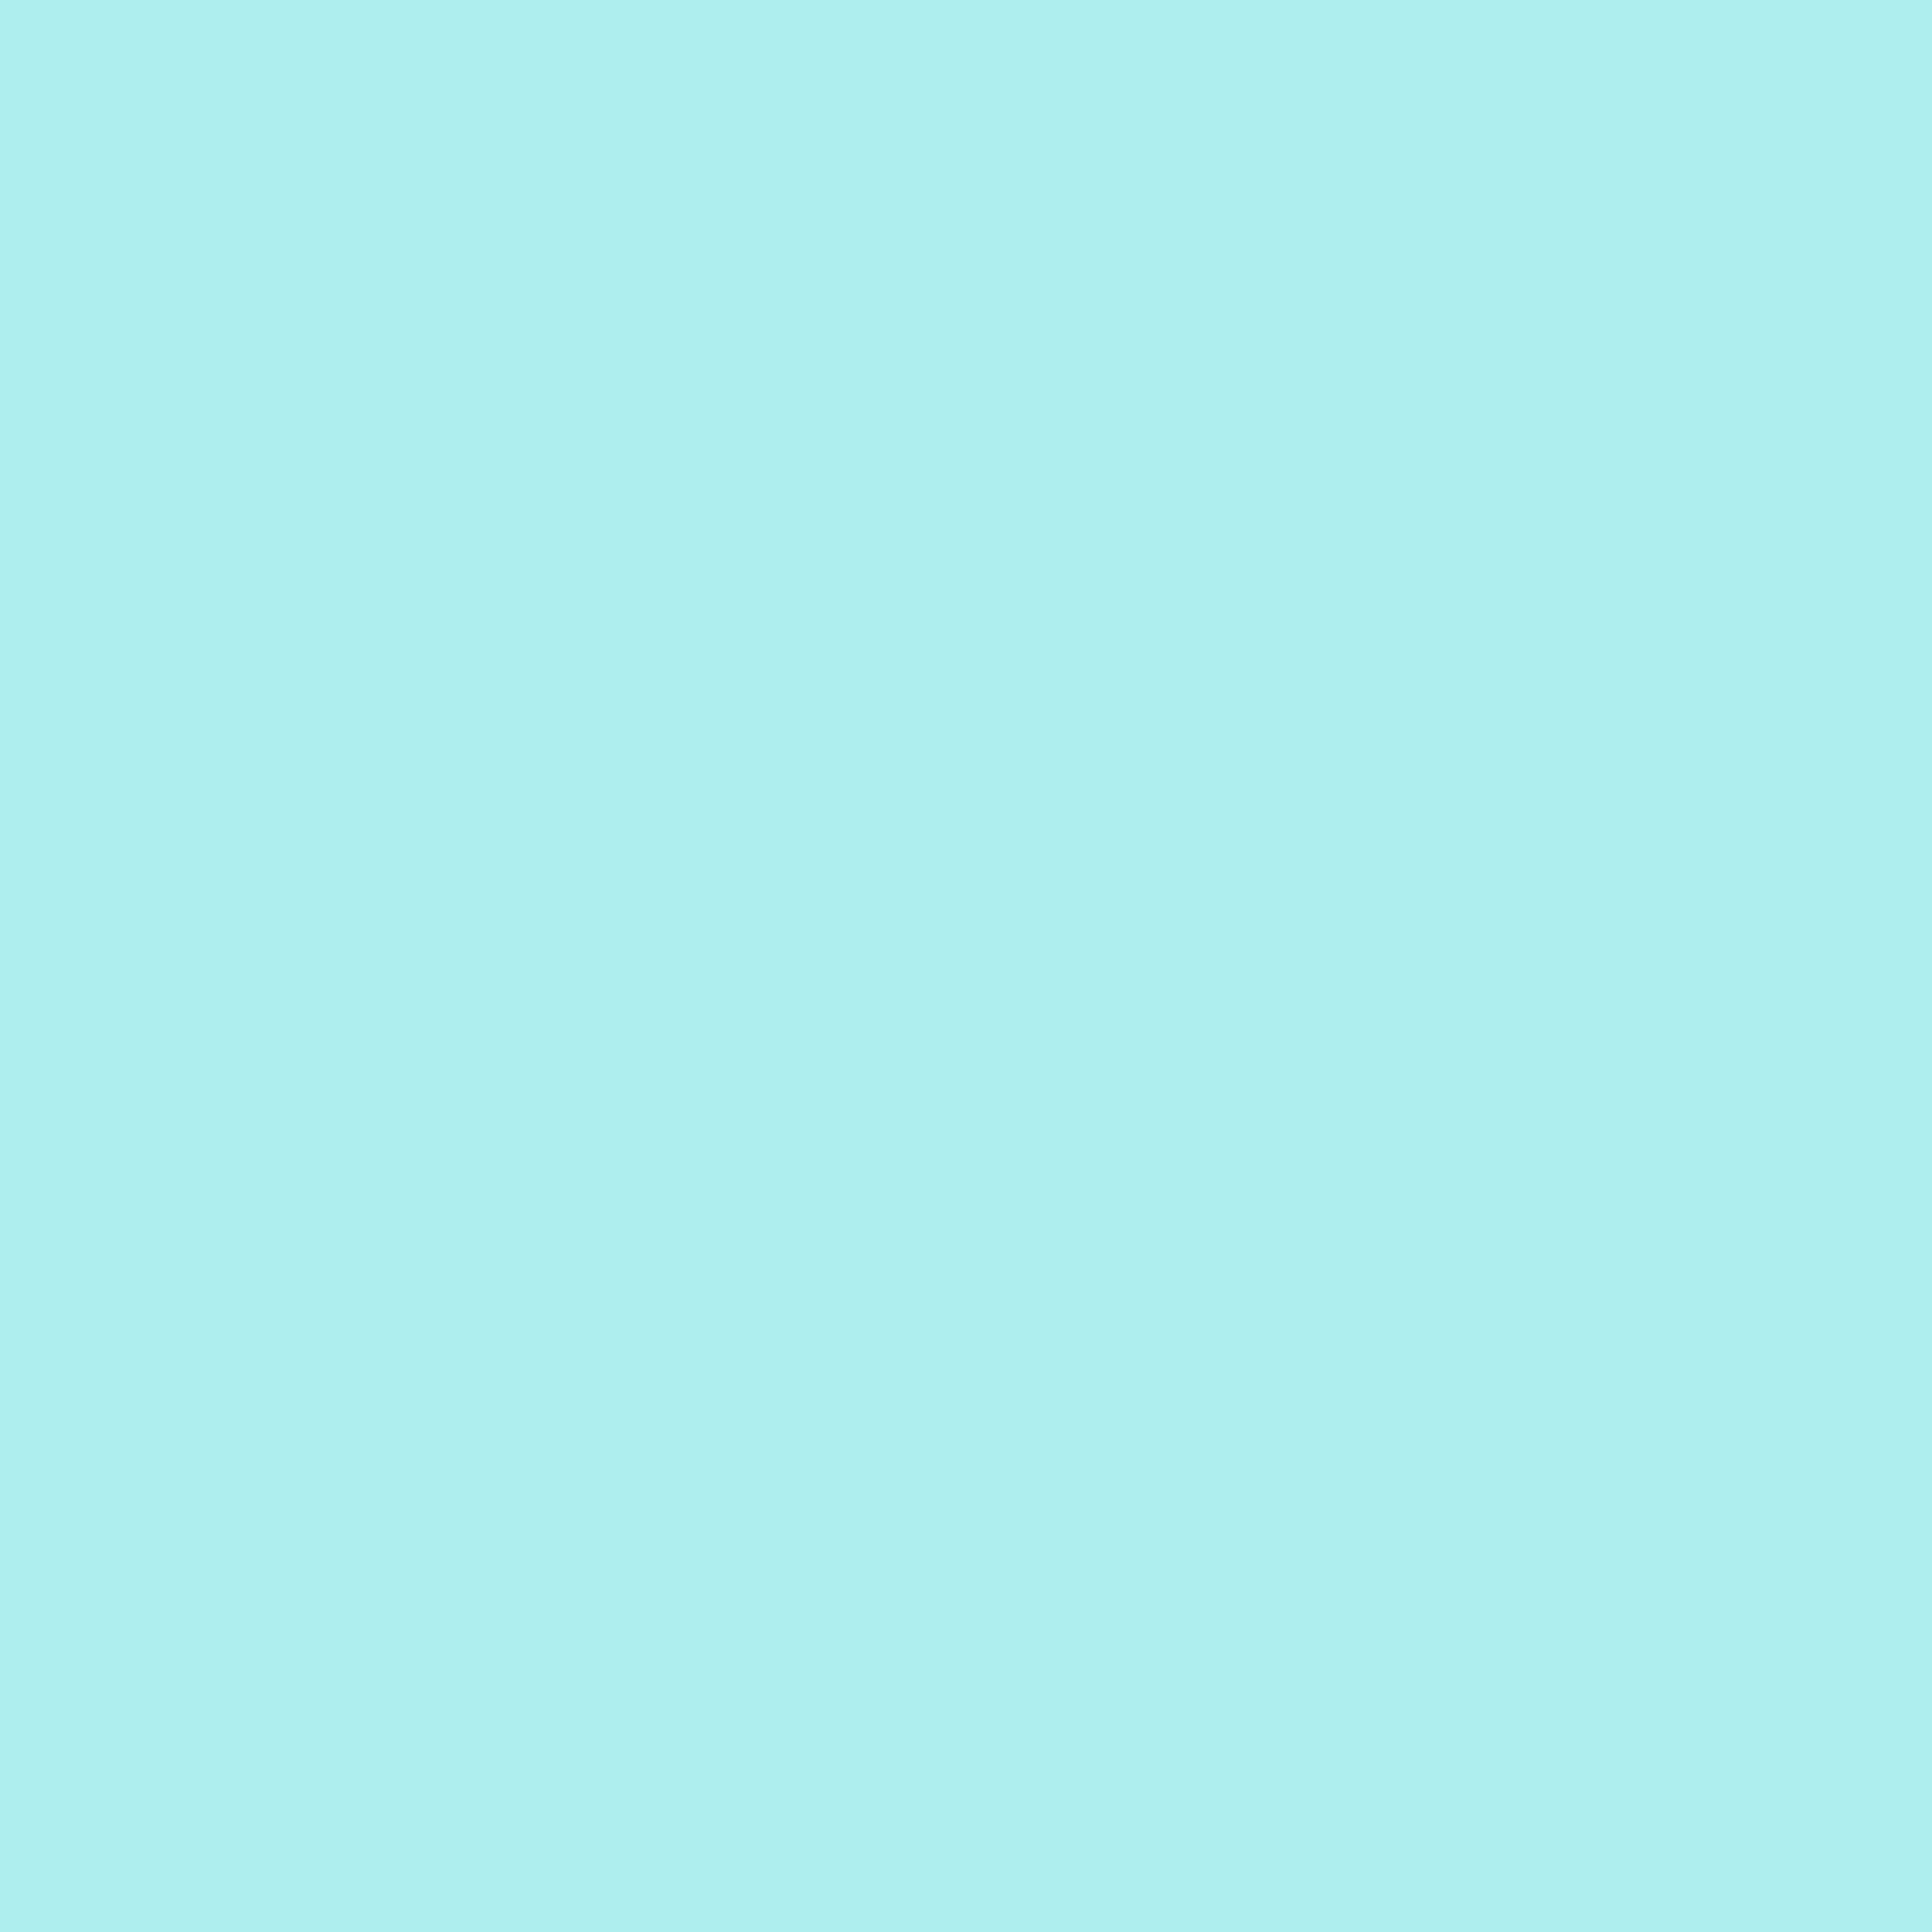 2732x2732 Pale Turquoise Solid Color Background